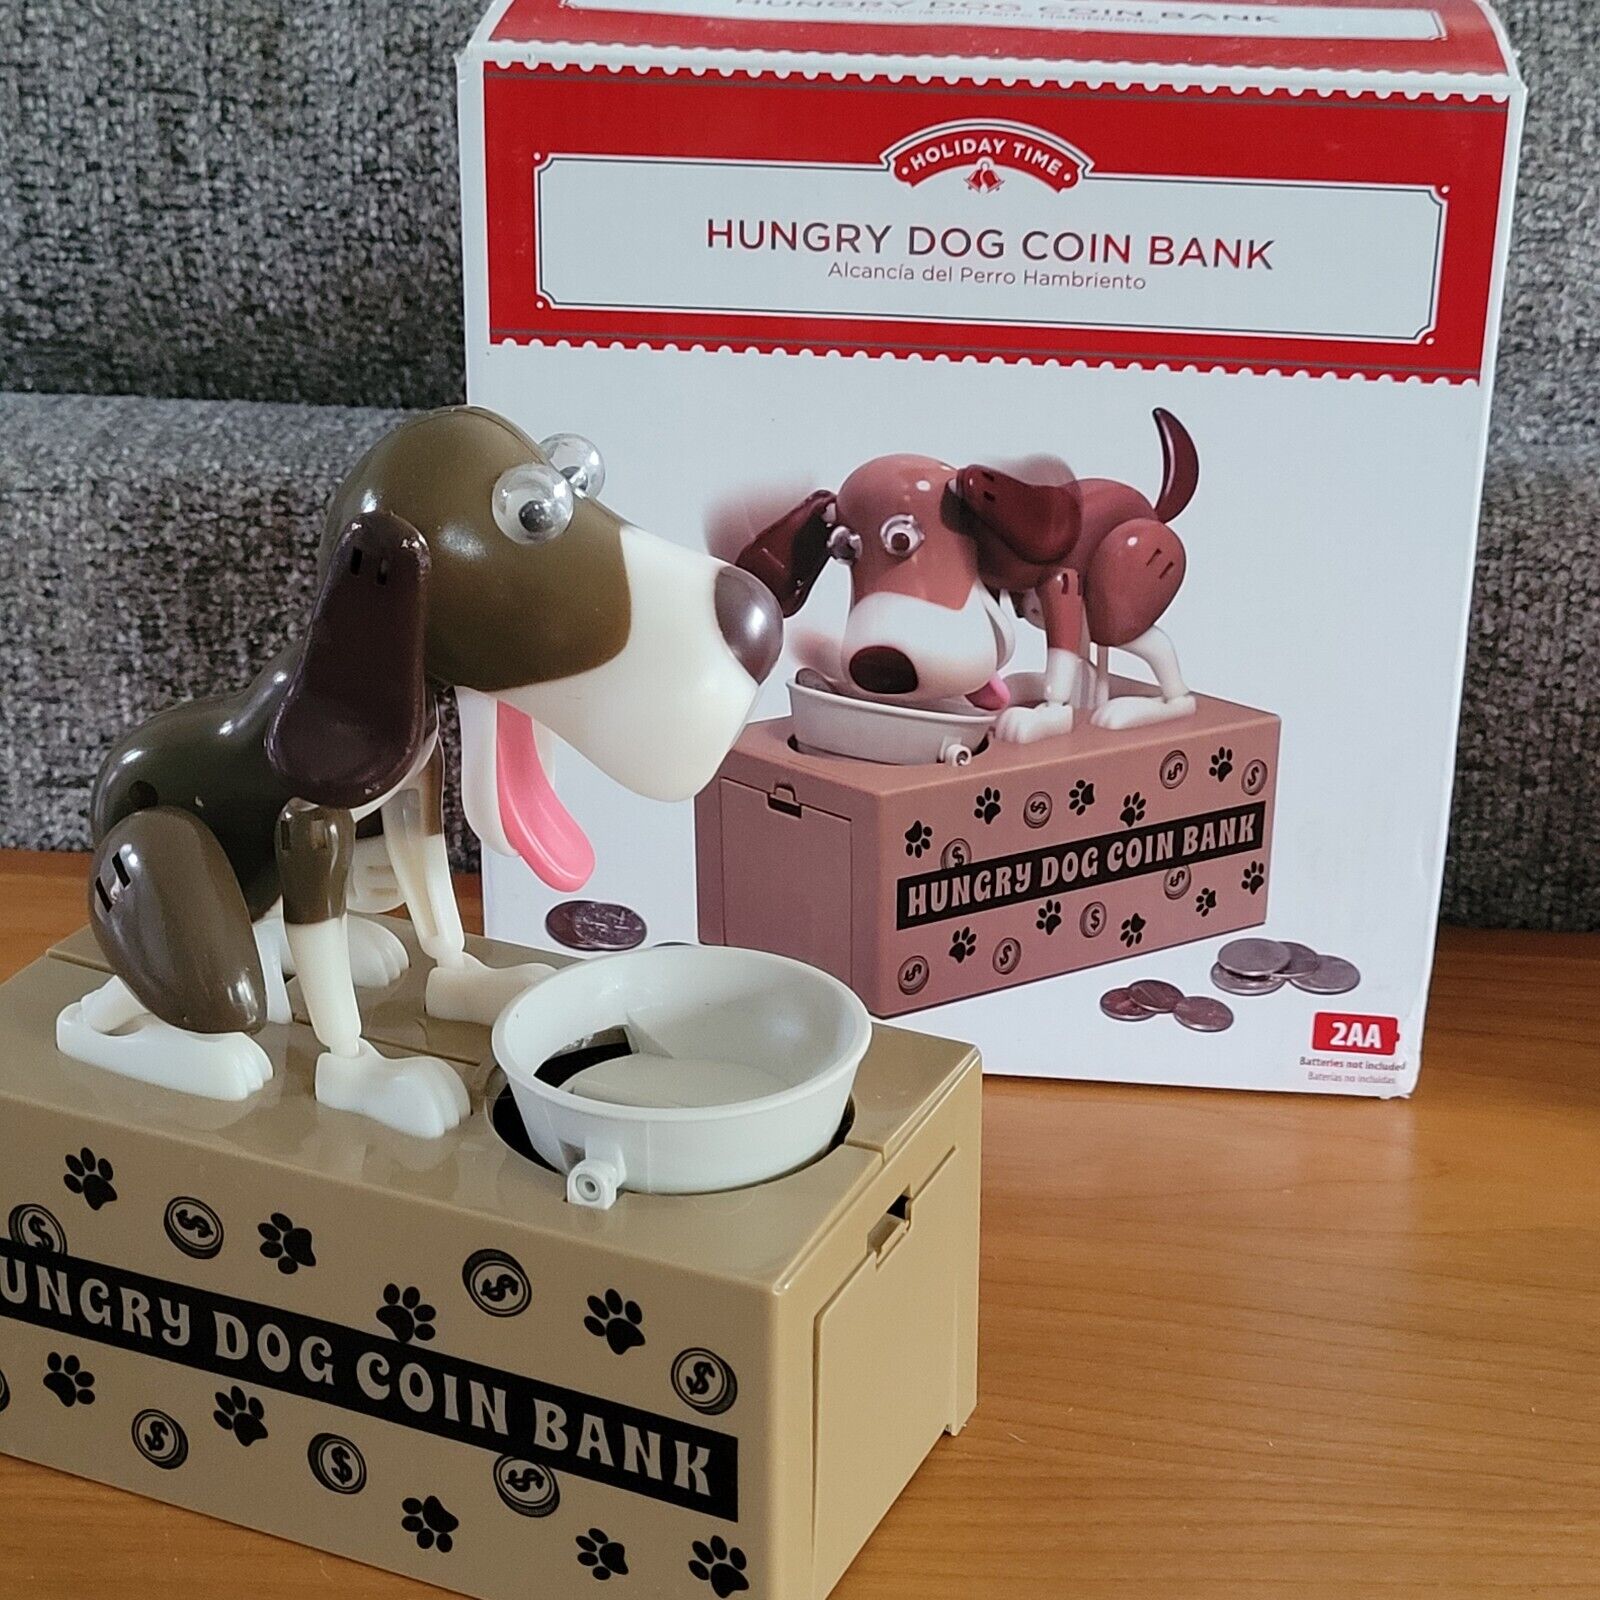 Hungry Dog Coin Bank - Animated Robotic Dog Eats Coins Holiday Time NEW in BOX